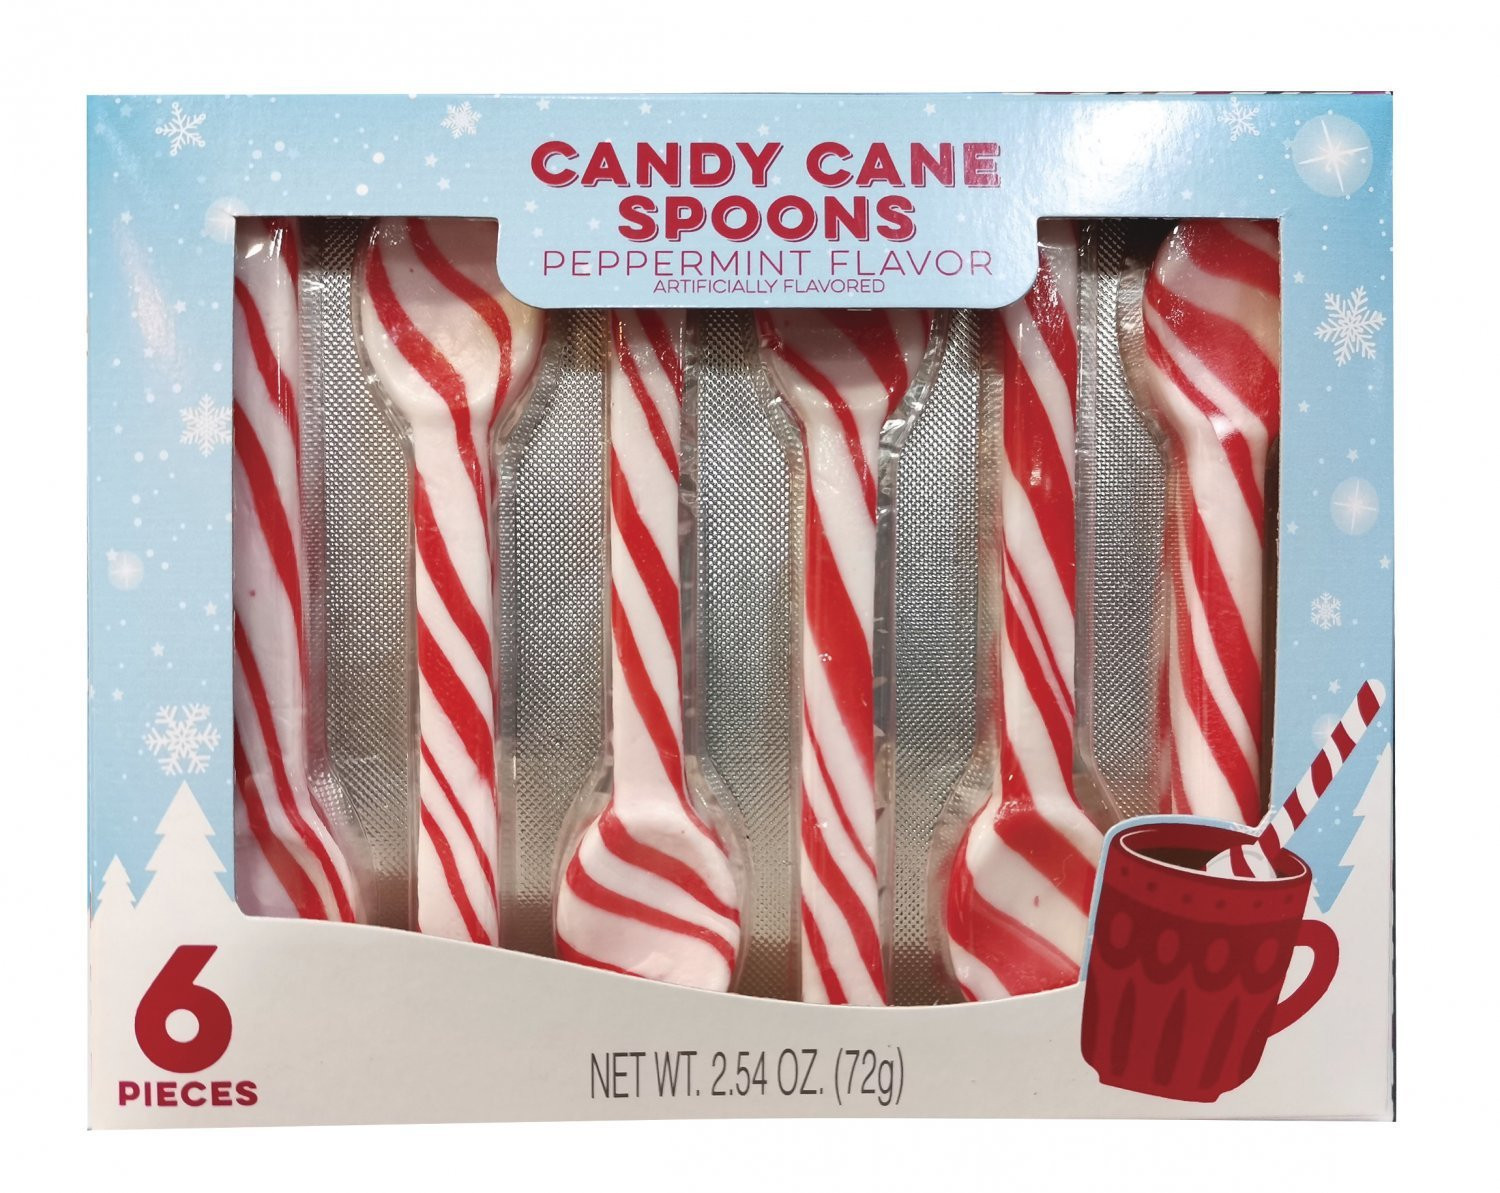 Hilco Holiday Peppermint Candy Spoons 6ct. Box